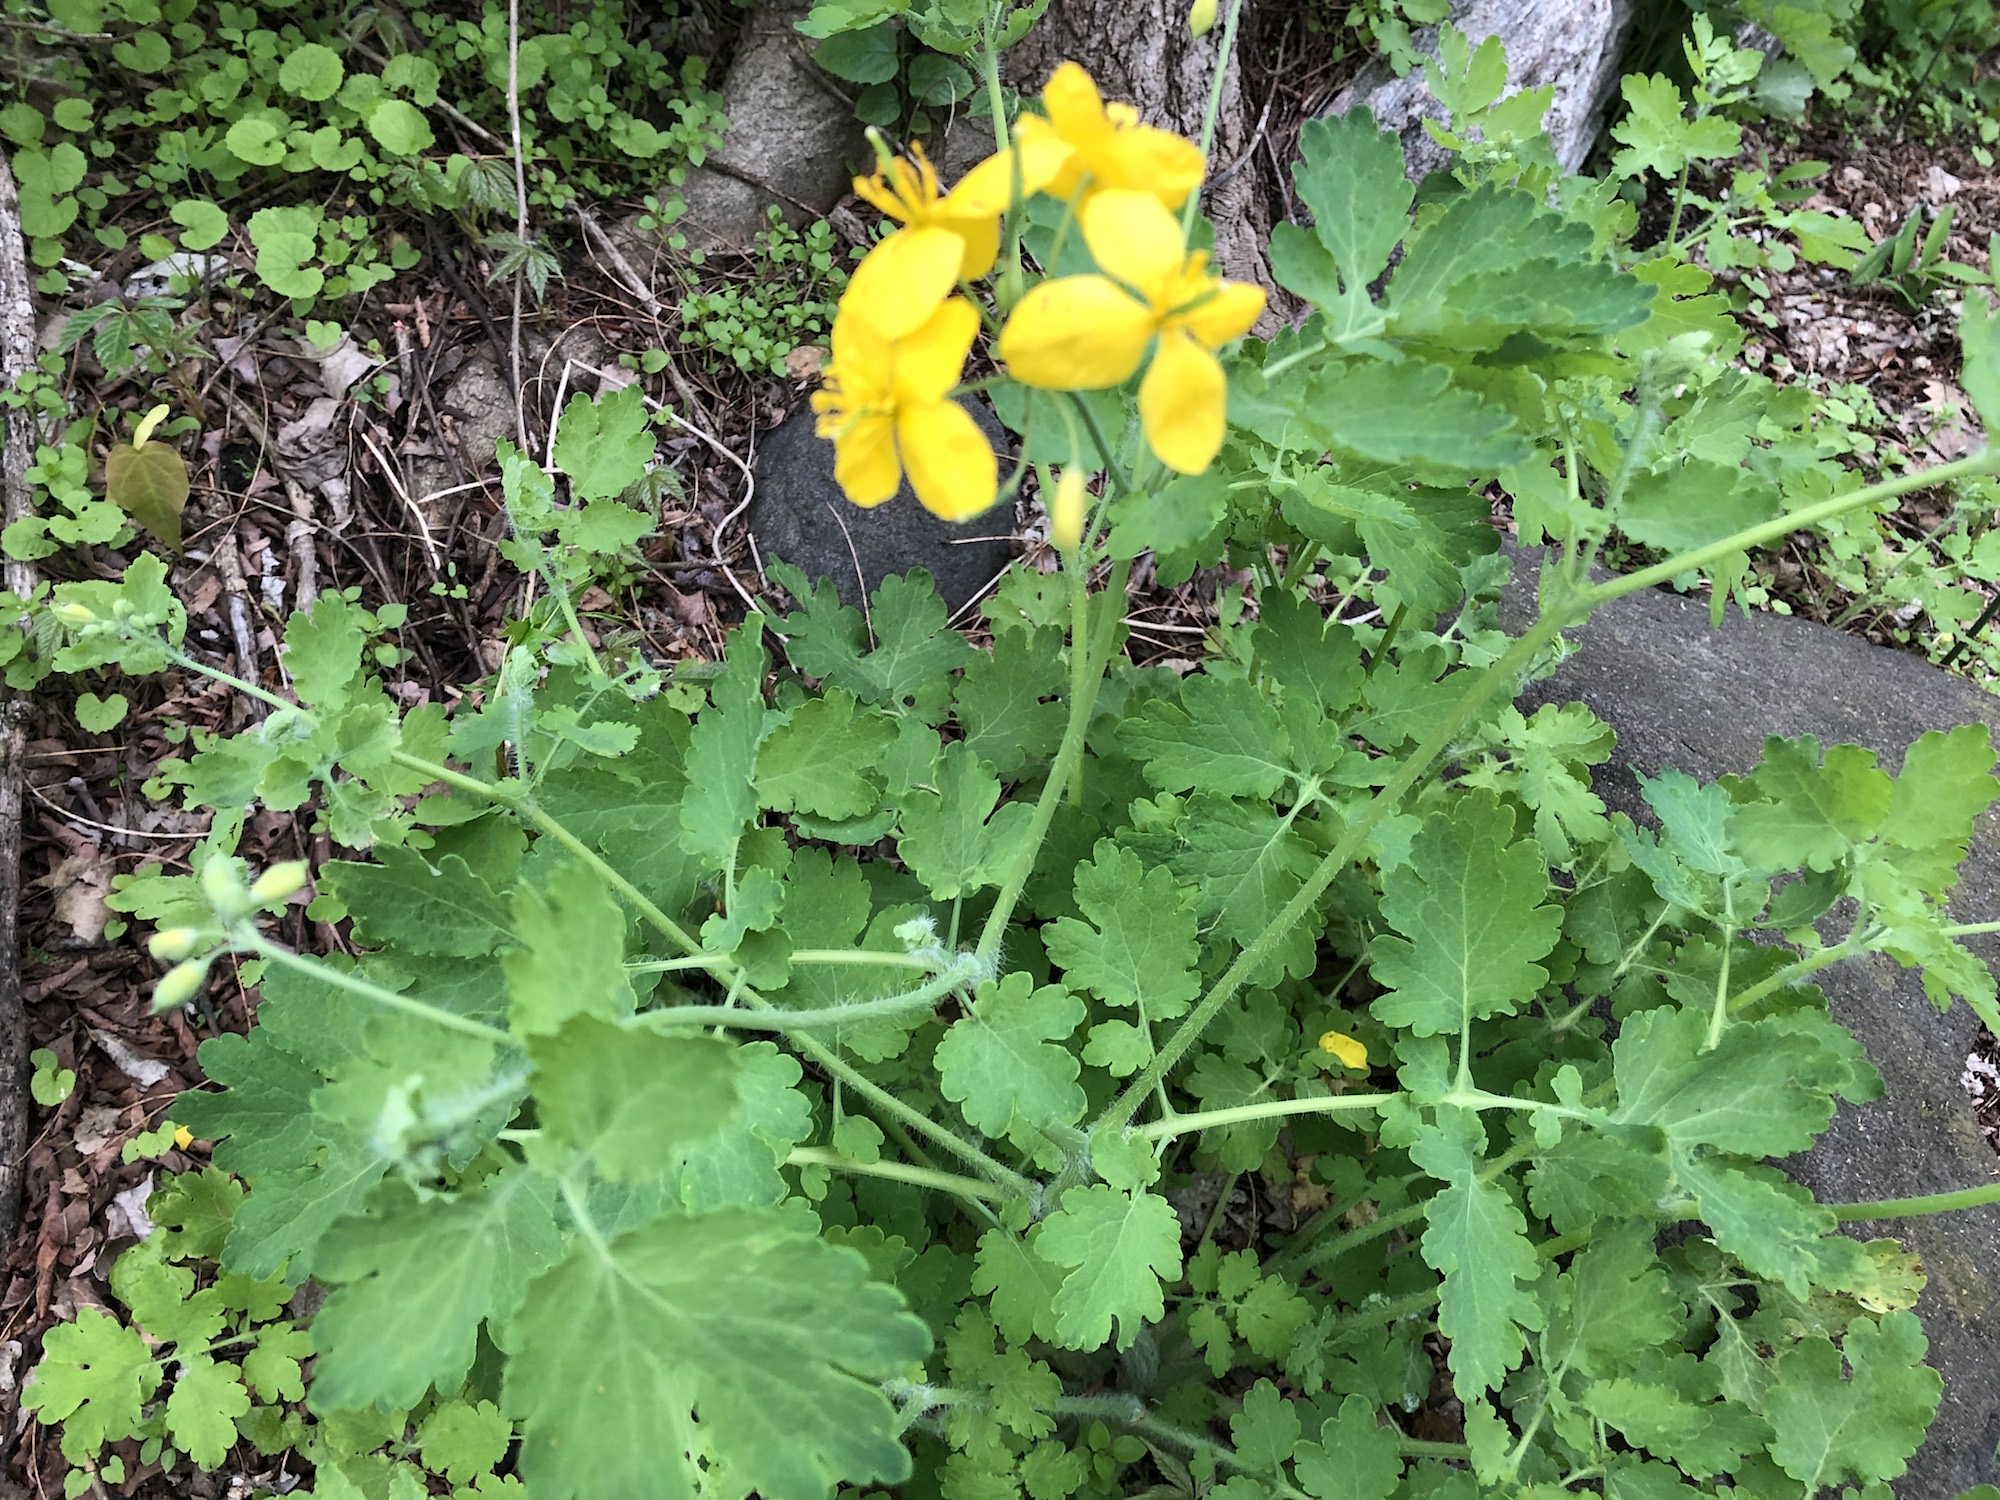 Greater Celandine on May 17, 2019.